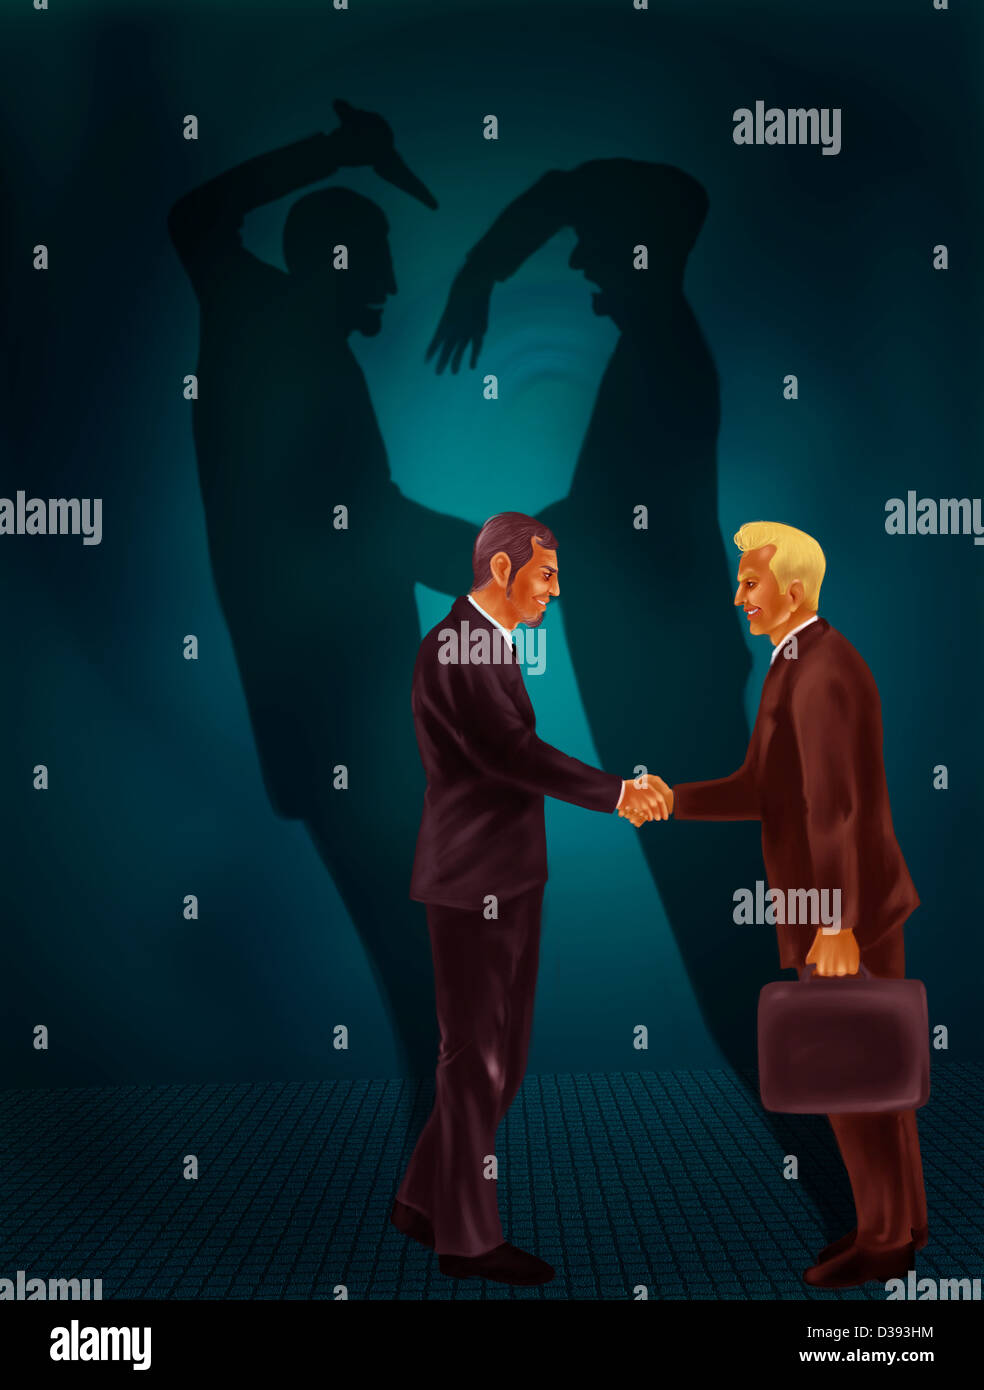 Two businessmen shaking hands with behind black shadows showing crime Stock Photo